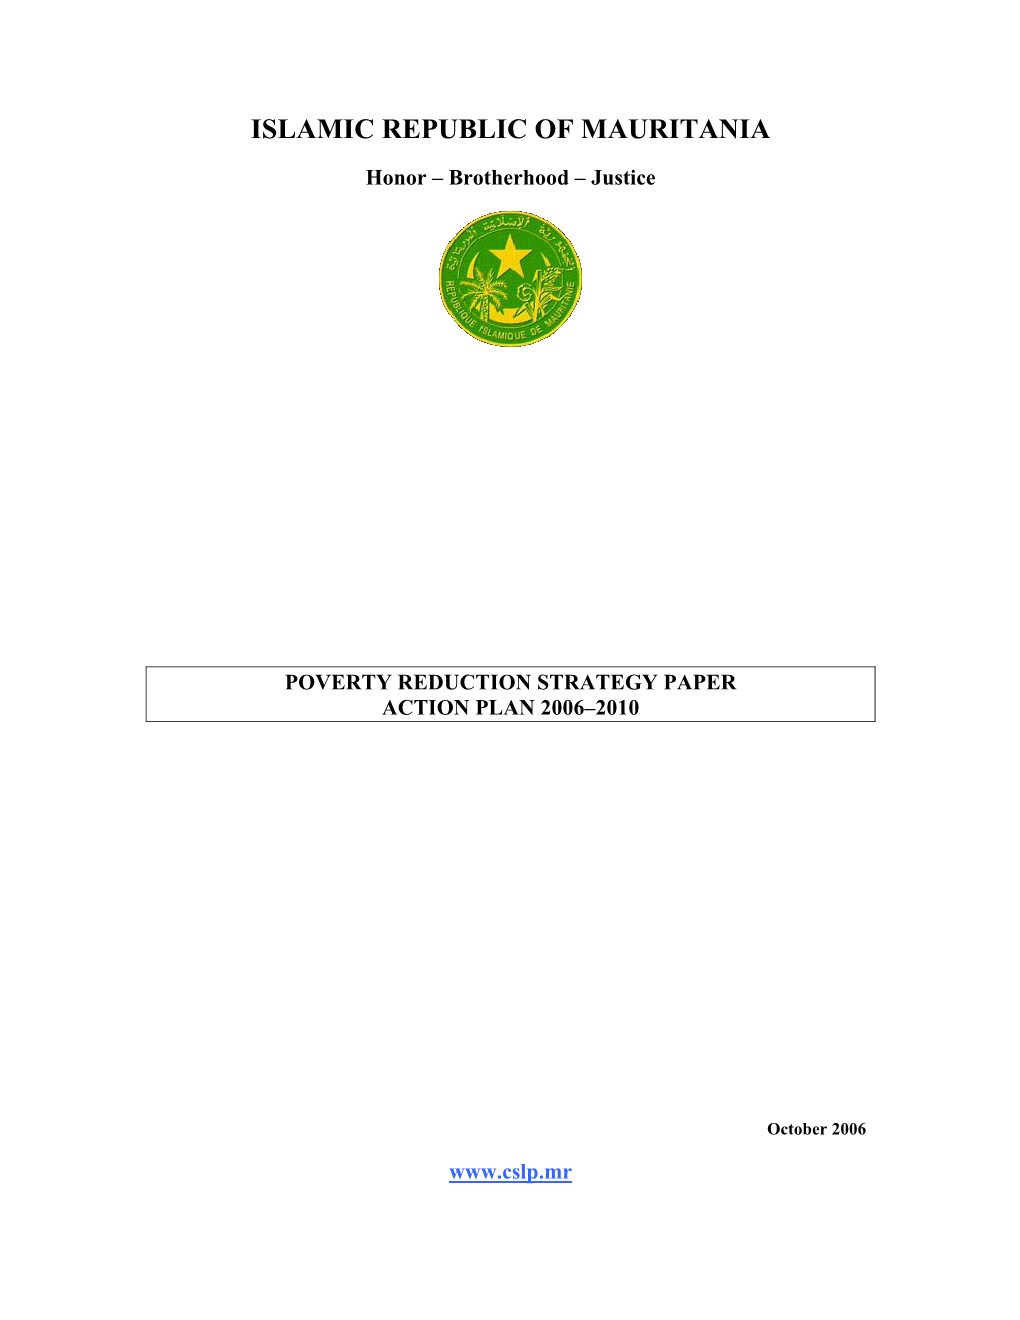 Islamic Republic of Mauritania: Poverty Reduction Strategy Paper